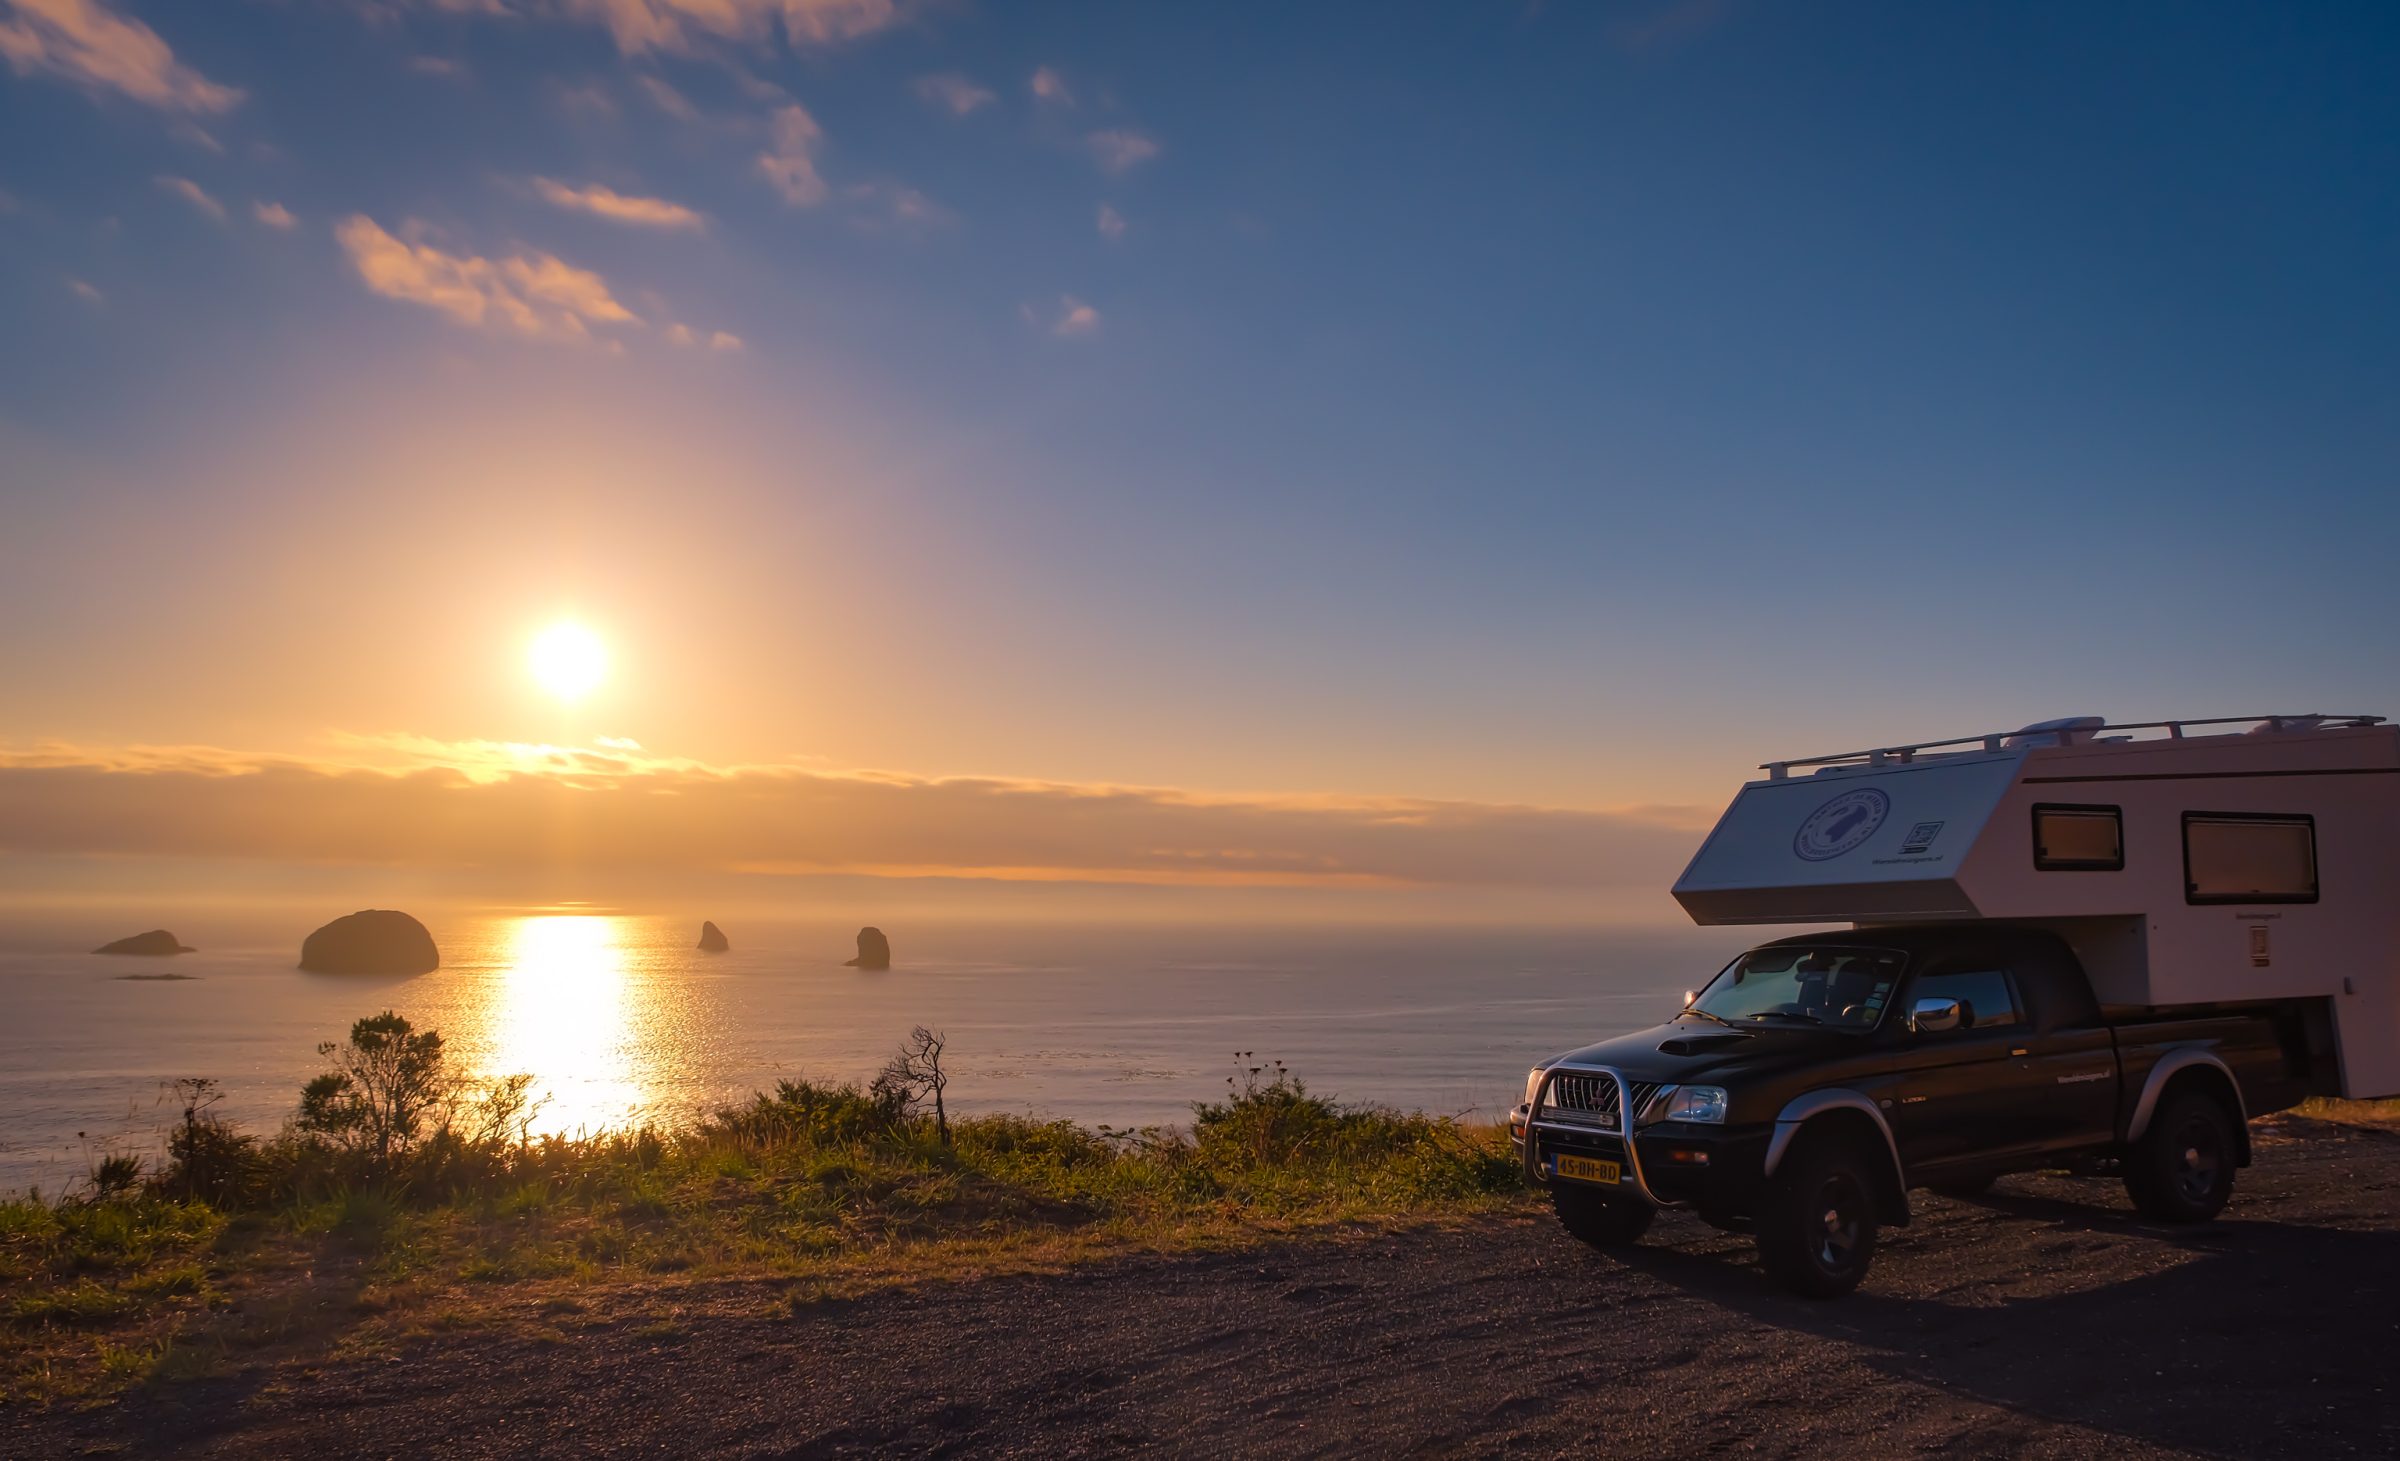 Enjoy the sunset on a pullout | Oregon, Route 101